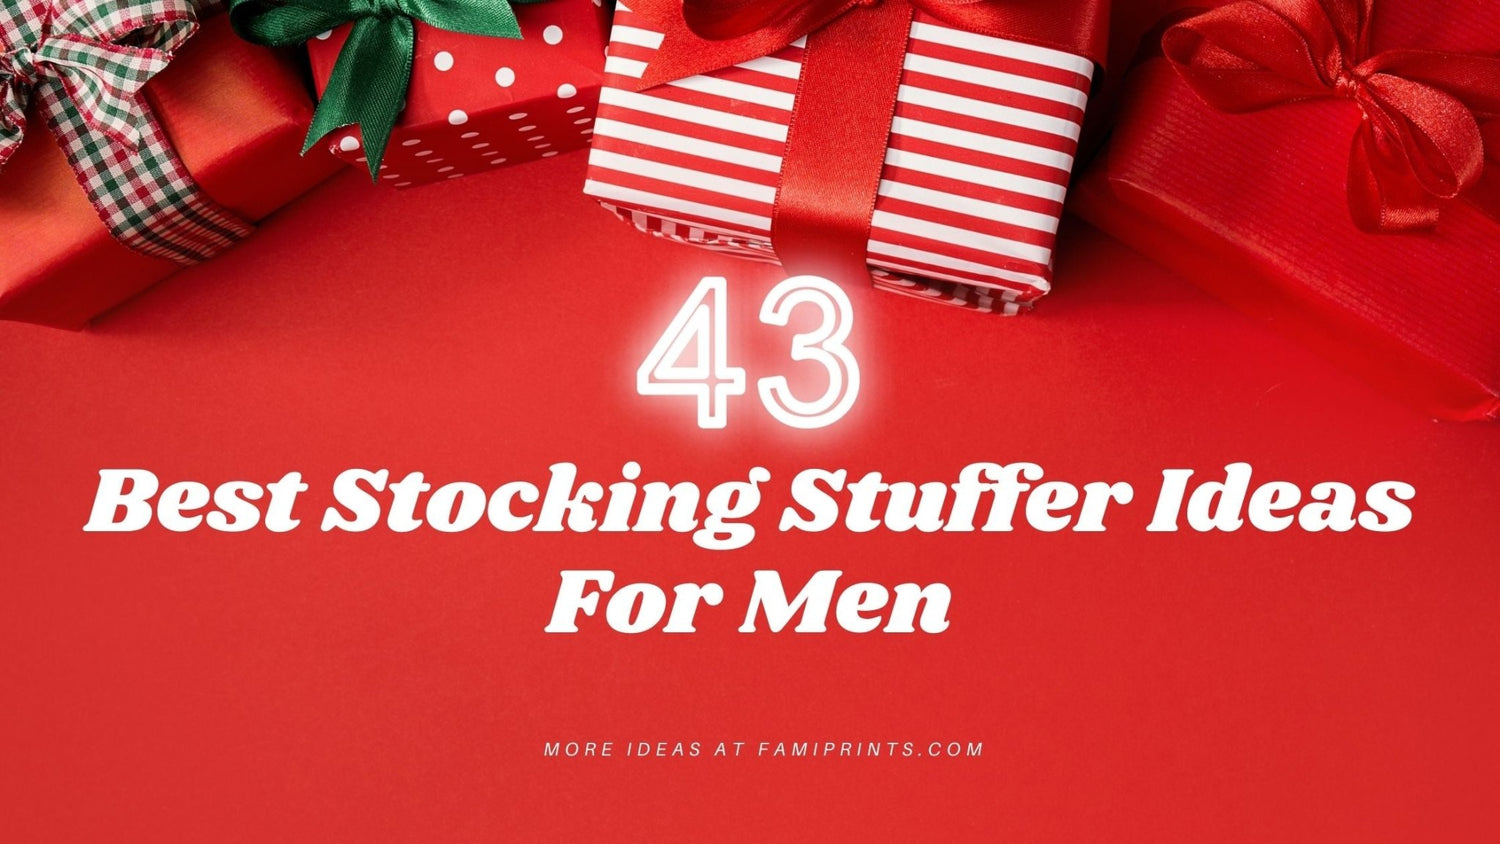 37 Stocking Stuffer Ideas for Men That'll Surprise and Delight